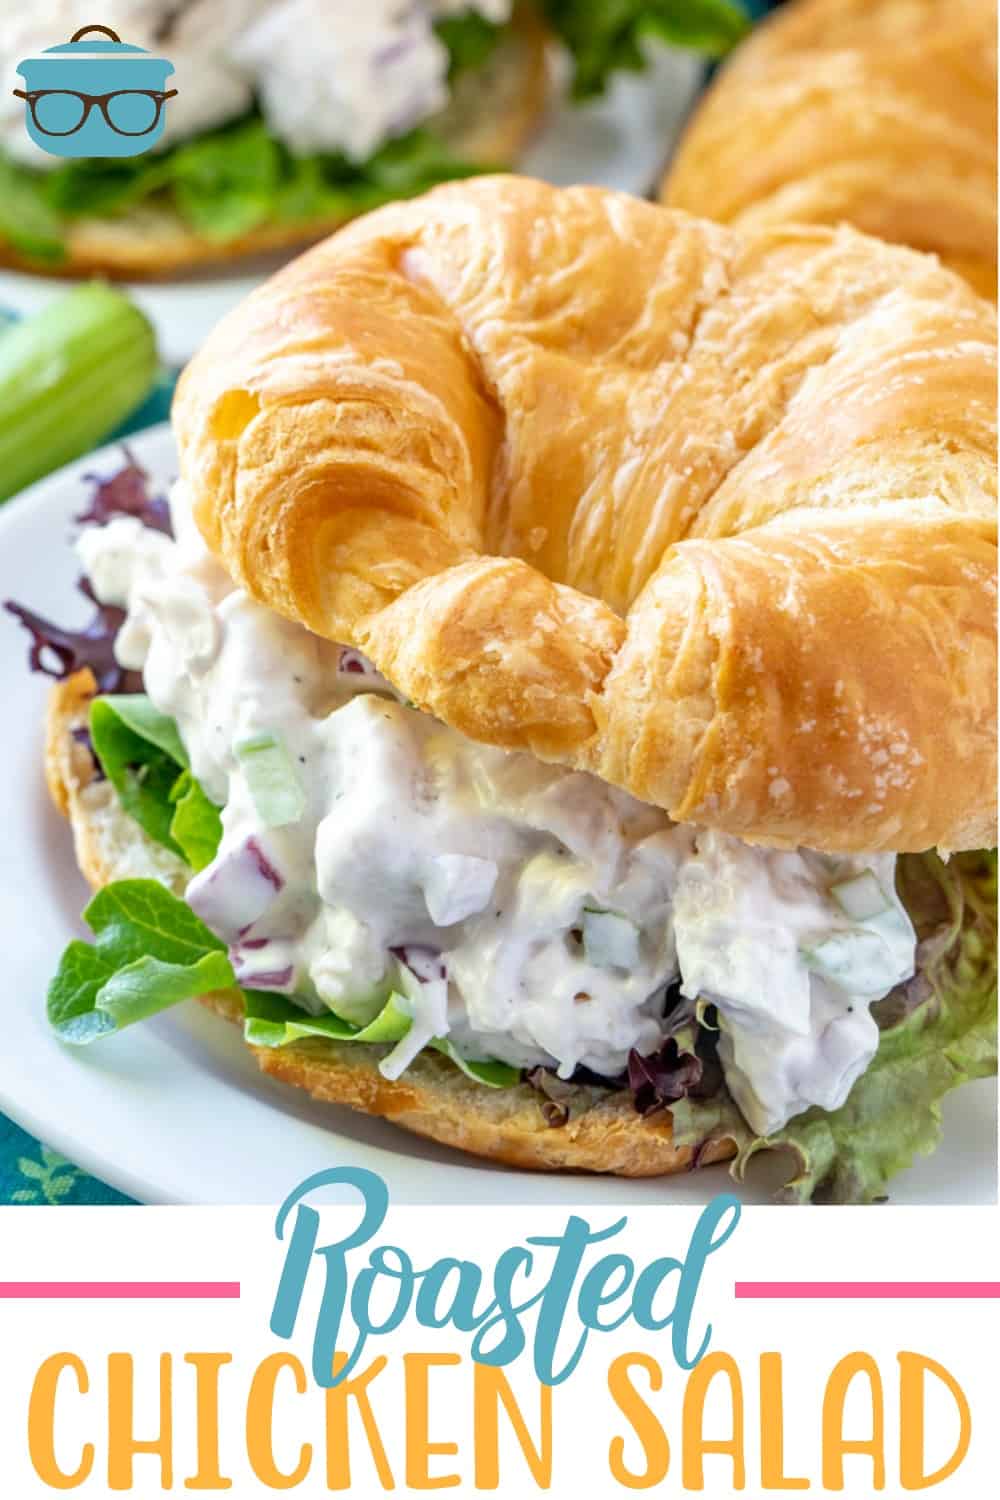 The Best Roasted Chicken Salad recipe from The Country Cook shown in a croissant with some lettuce on a round white plate.